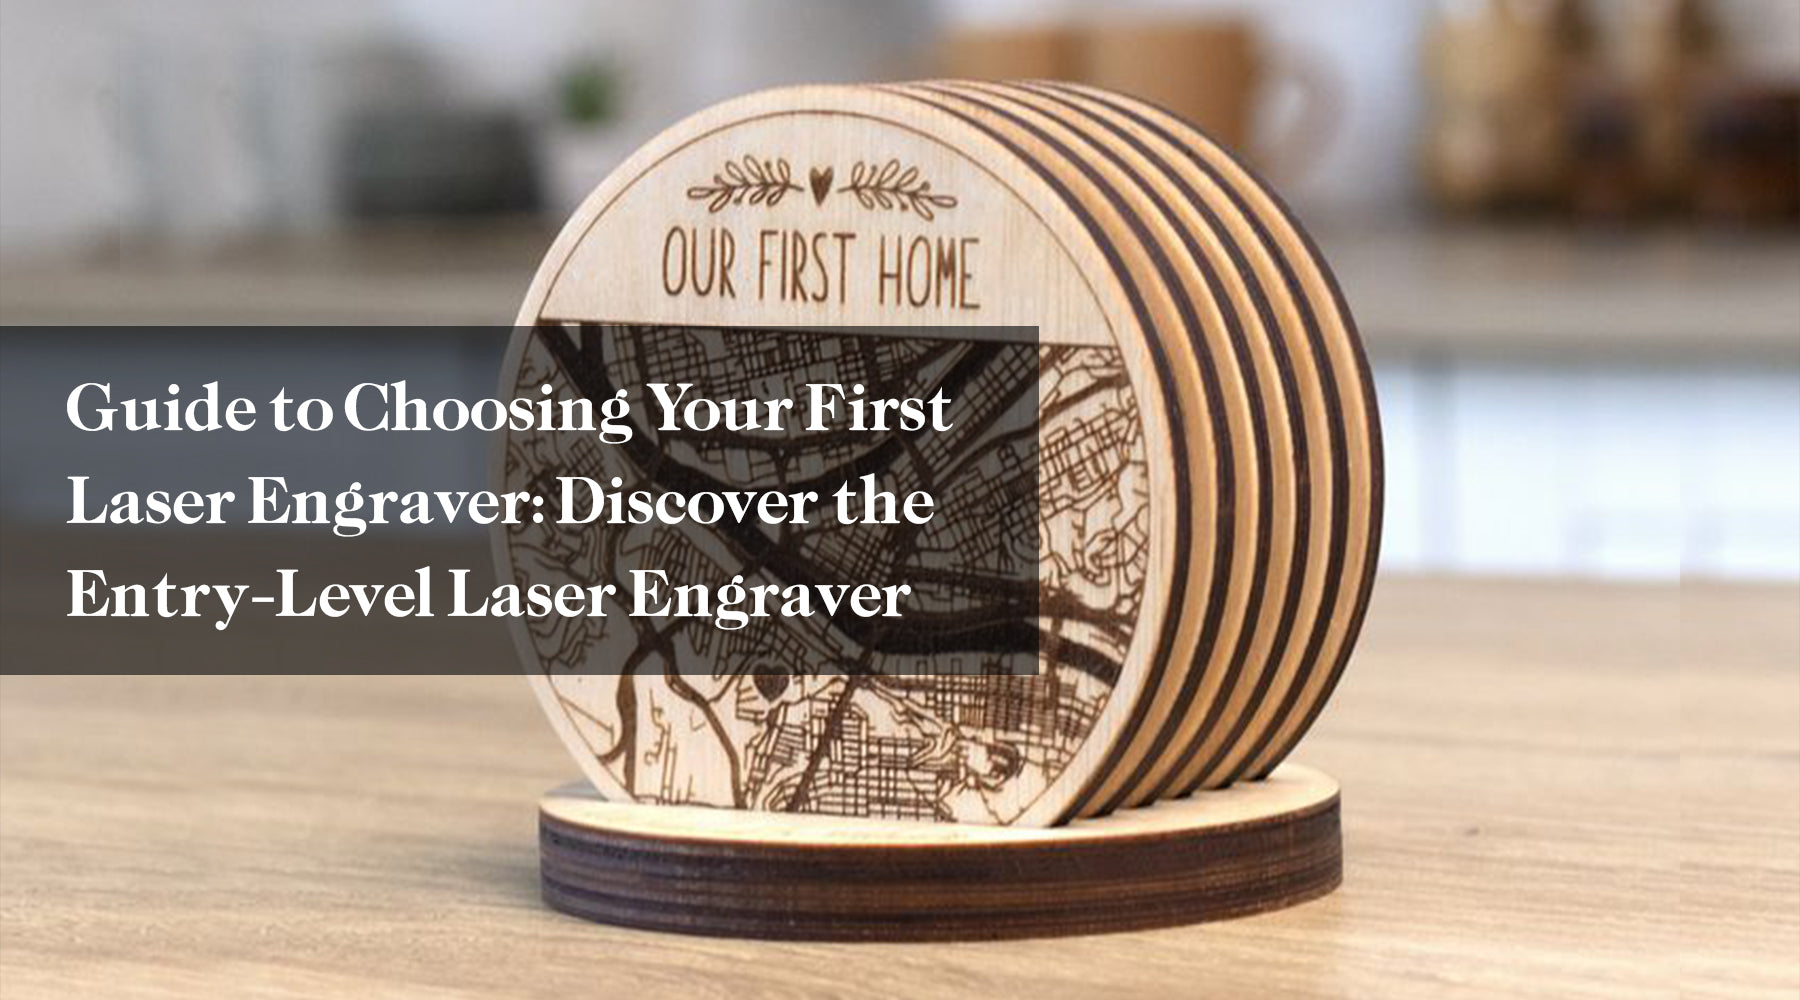 Guide to Choosing Your First Laser Engraver: Discover the Entry-Level Laser Engraver